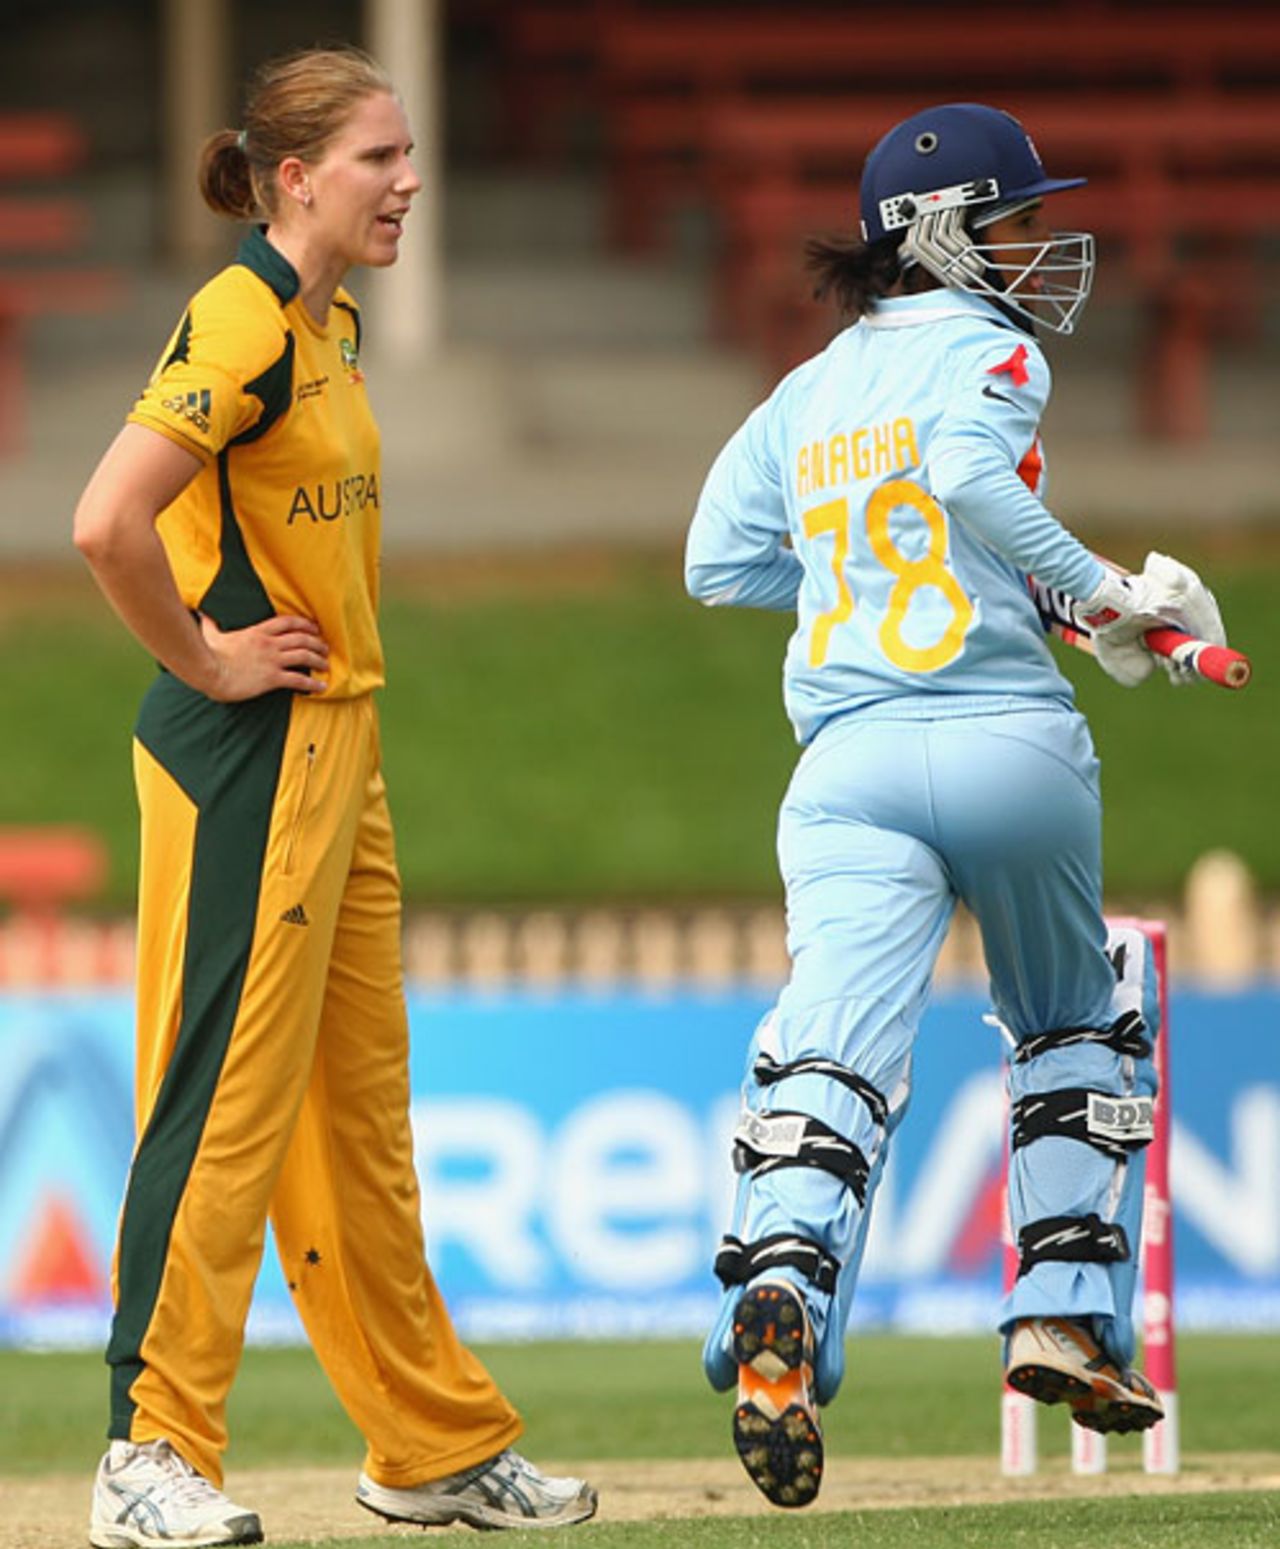 Emma Sampson vents her frustration as Anagha Deshpande runs past her, Australia v India, Super Six, women's World Cup, Sydney, March 14, 2009